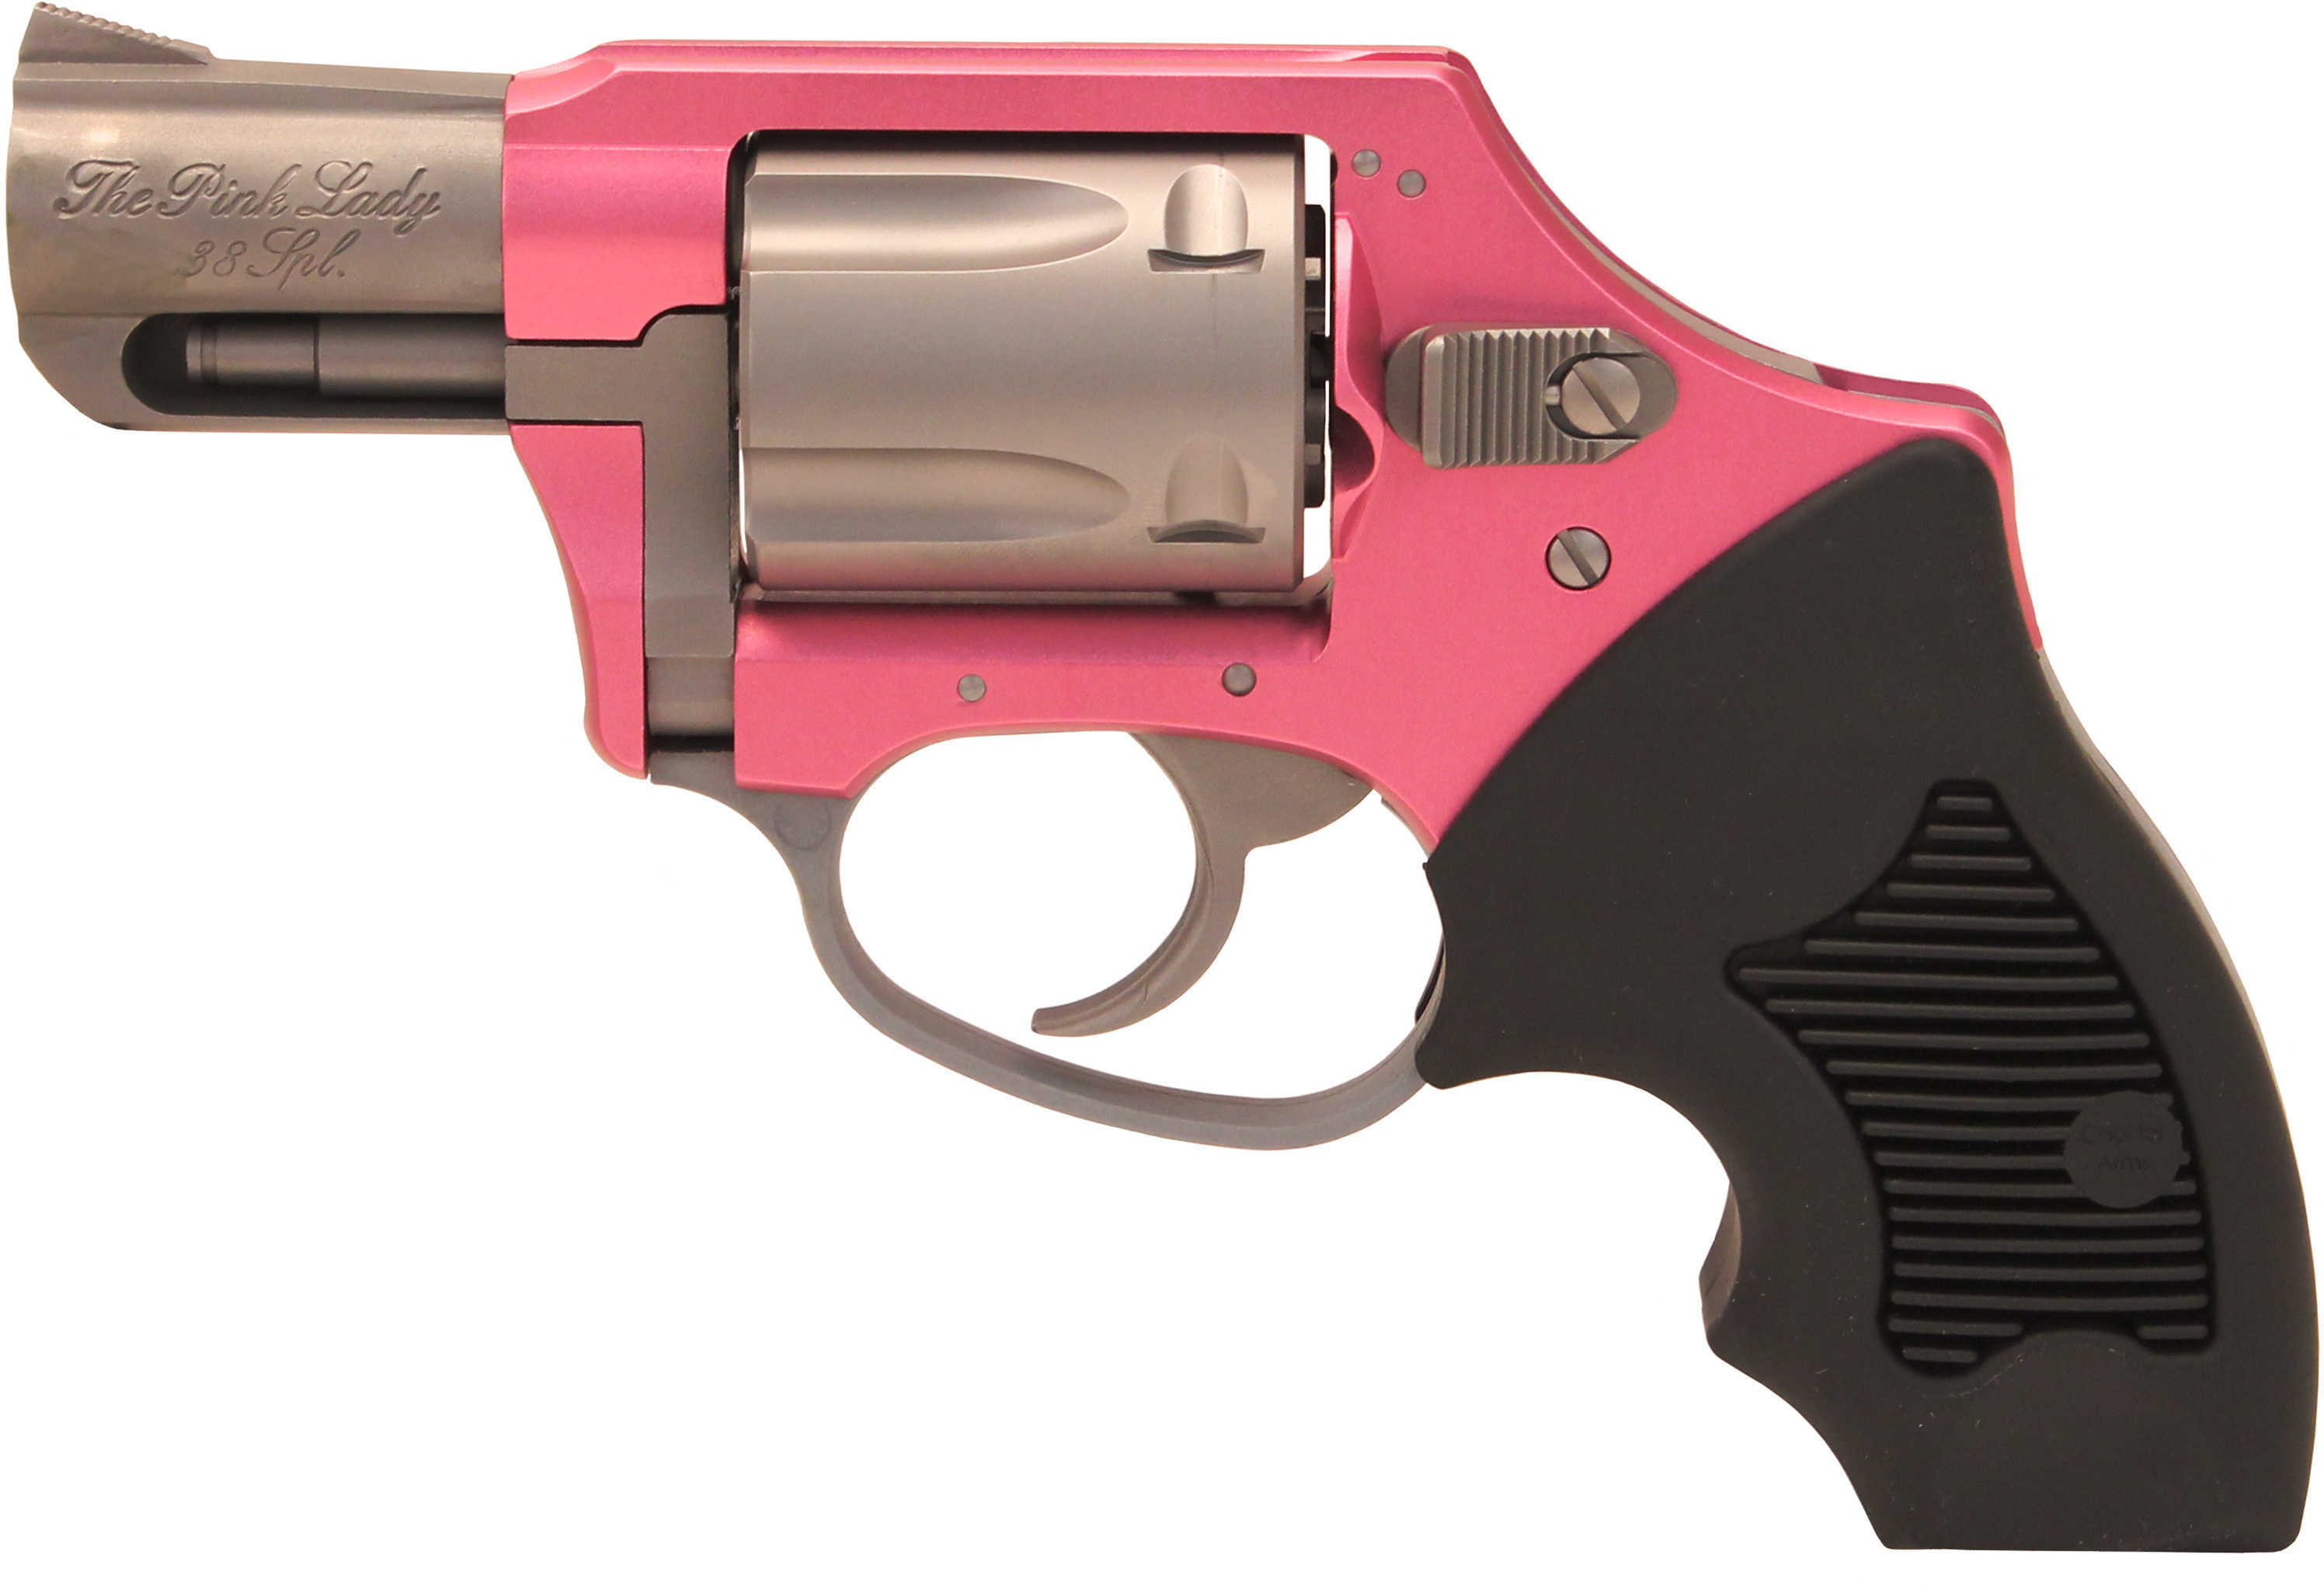 Charter Arms Pink Lady Undercover Lite Revolver 38 Special 2" Barrel 5 Round Stainless Steel